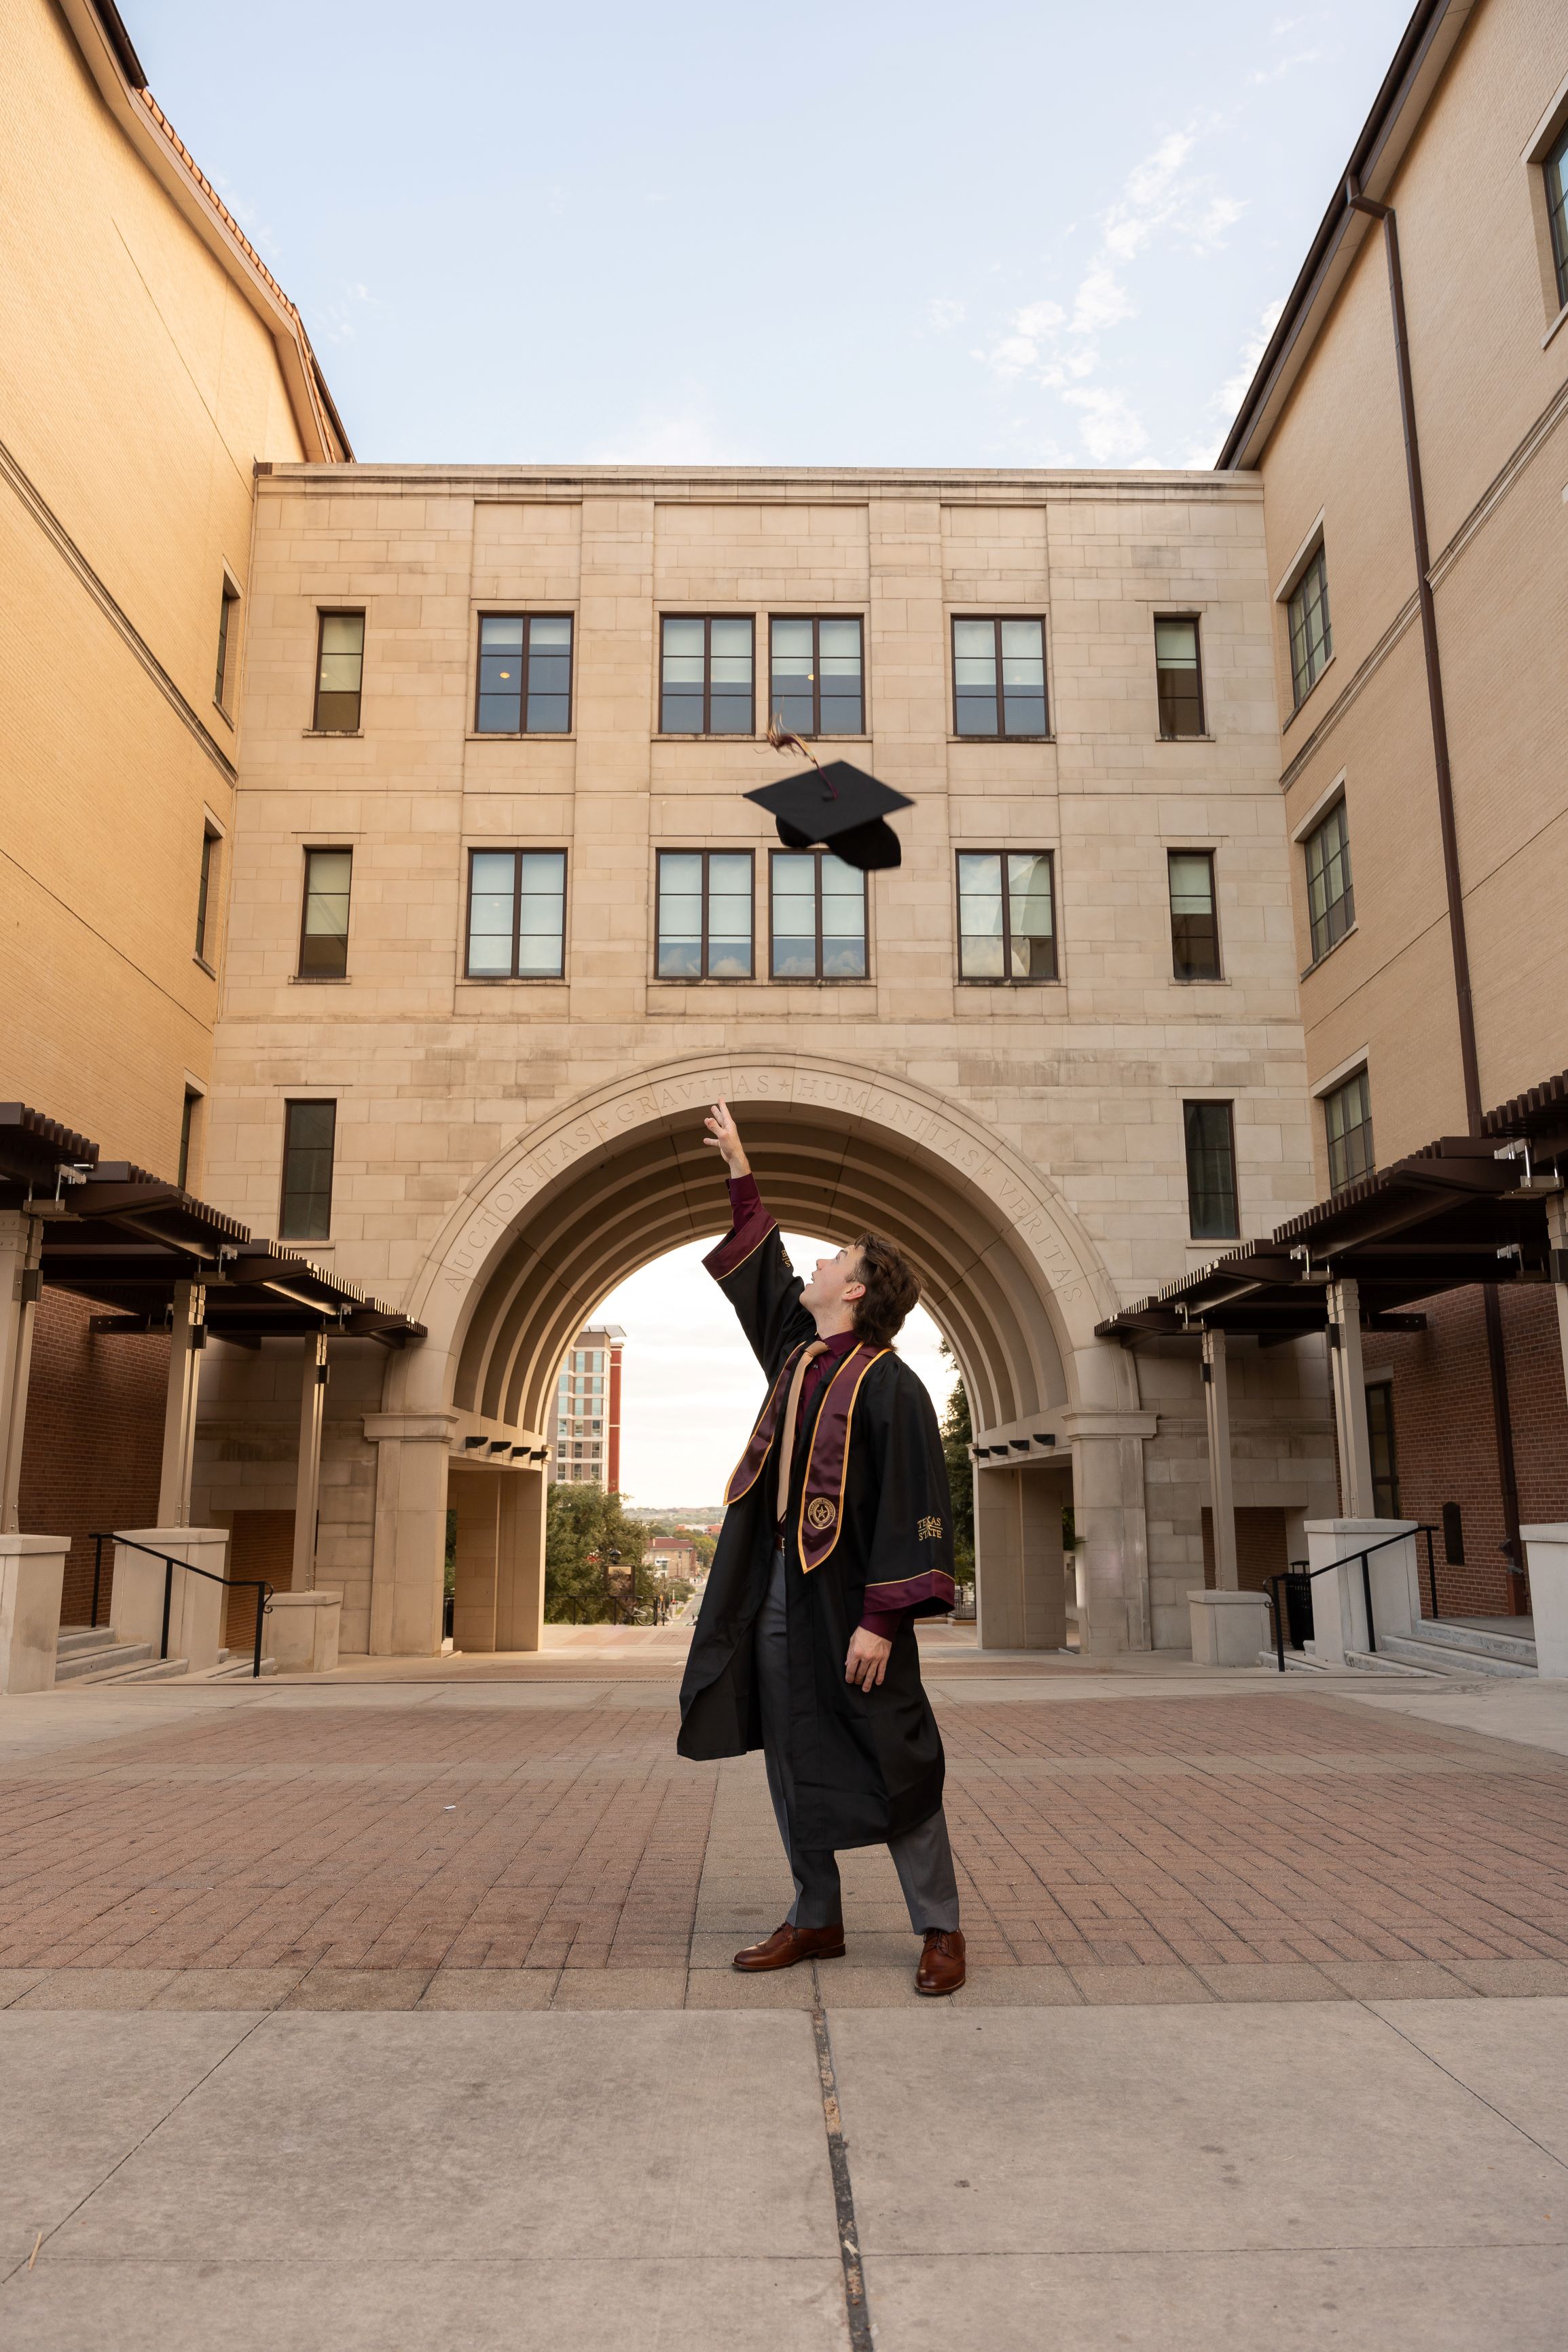 Jack in his graduation gown, throwing his cap in the air in front of Texas States UAC Building known as 'the arch'